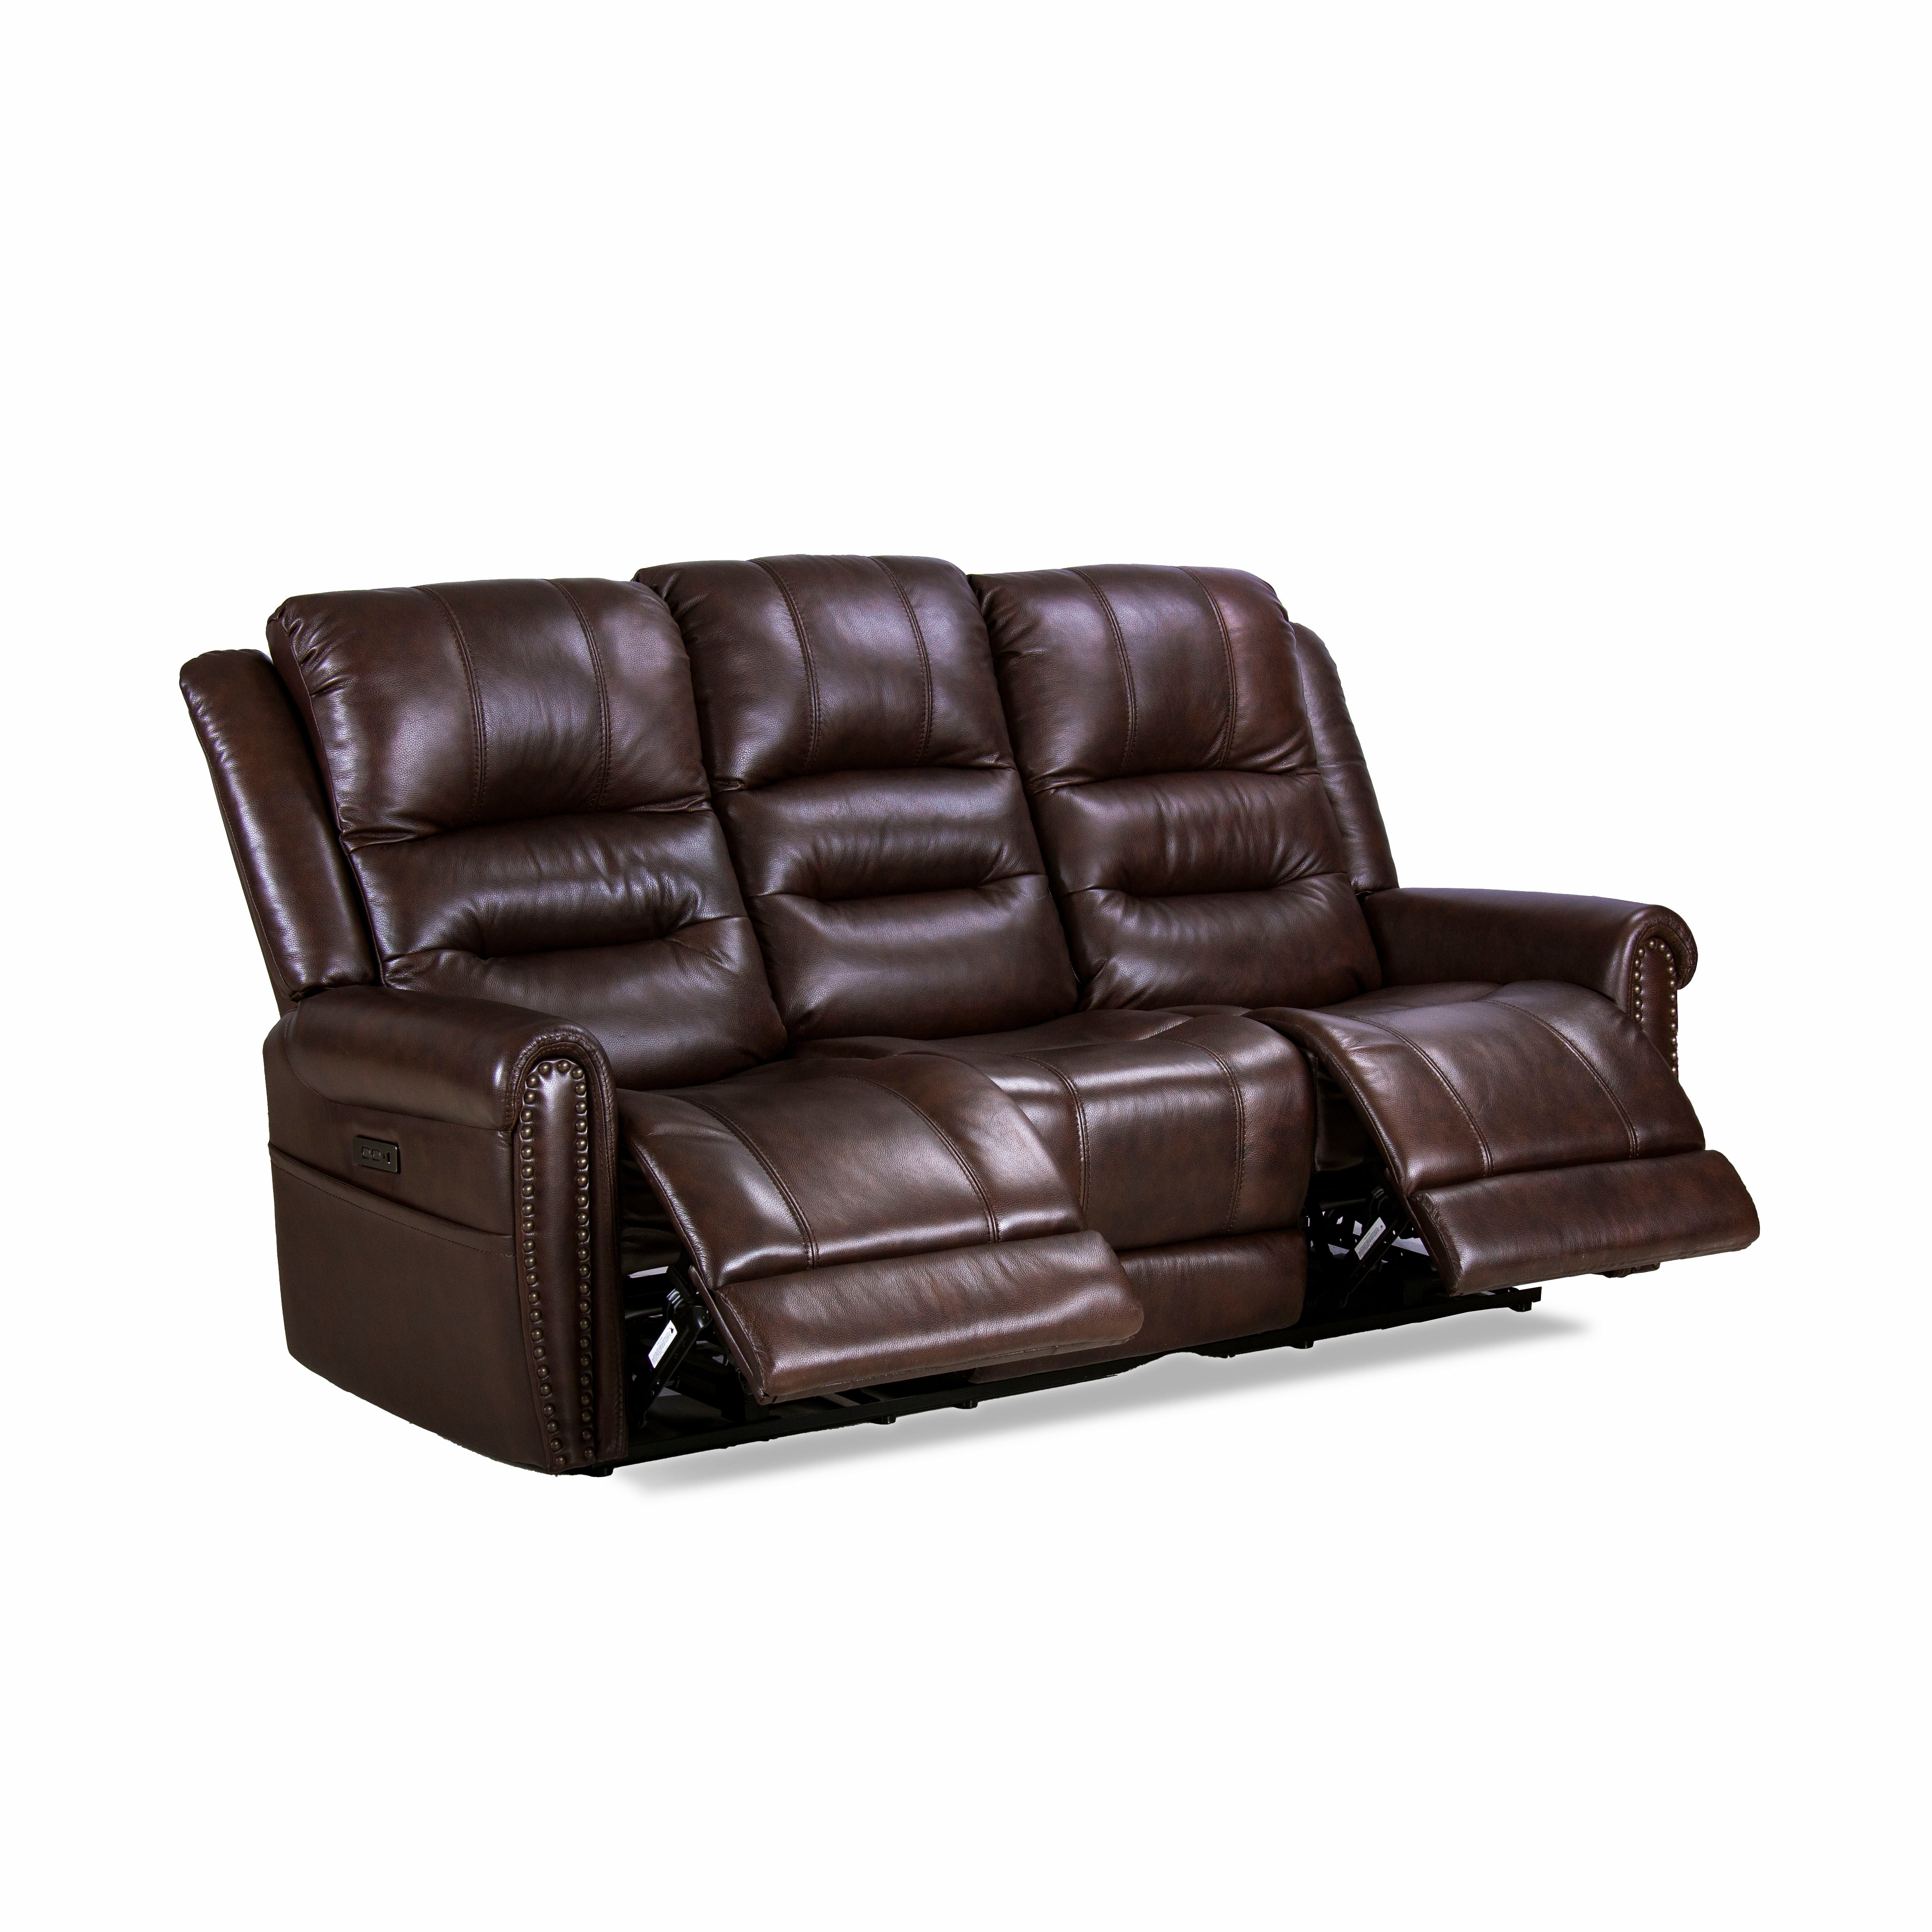 Espoo - Genuine Top Grain Leather Nailhead Dropdown Table And Adjustable Headrest Power Reclining Sofa In Brown